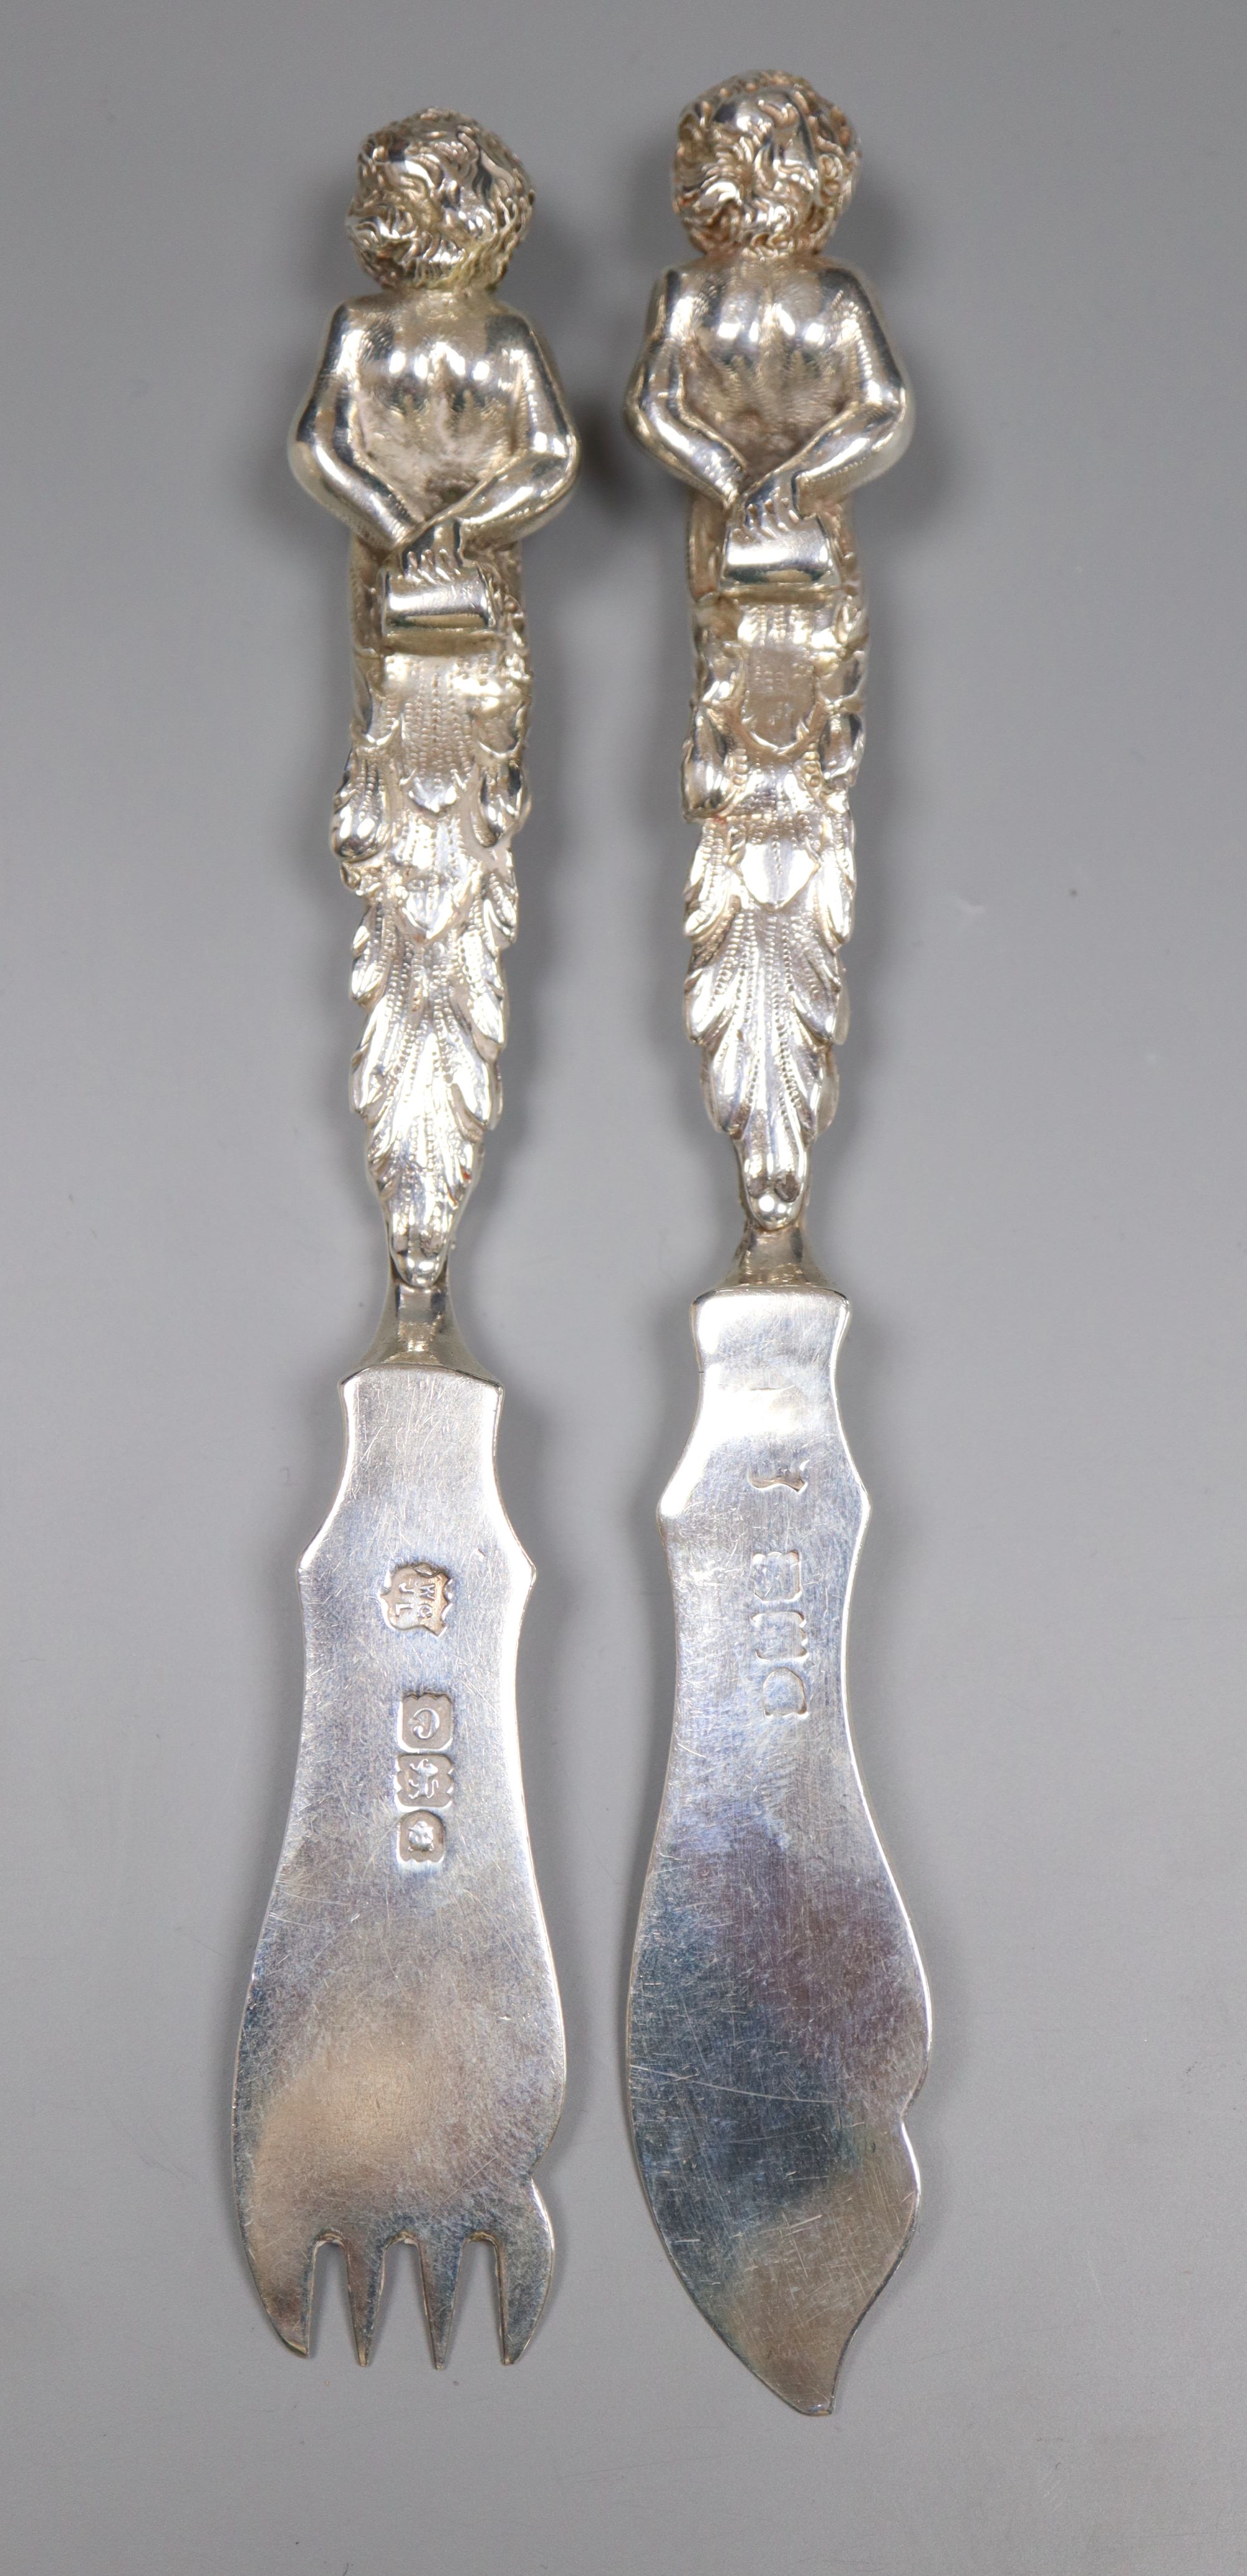 A pair of late Victorian silver fish eaters with figural handles by Goldsmiths & Silversmiths Co Ltd, London, 1898,